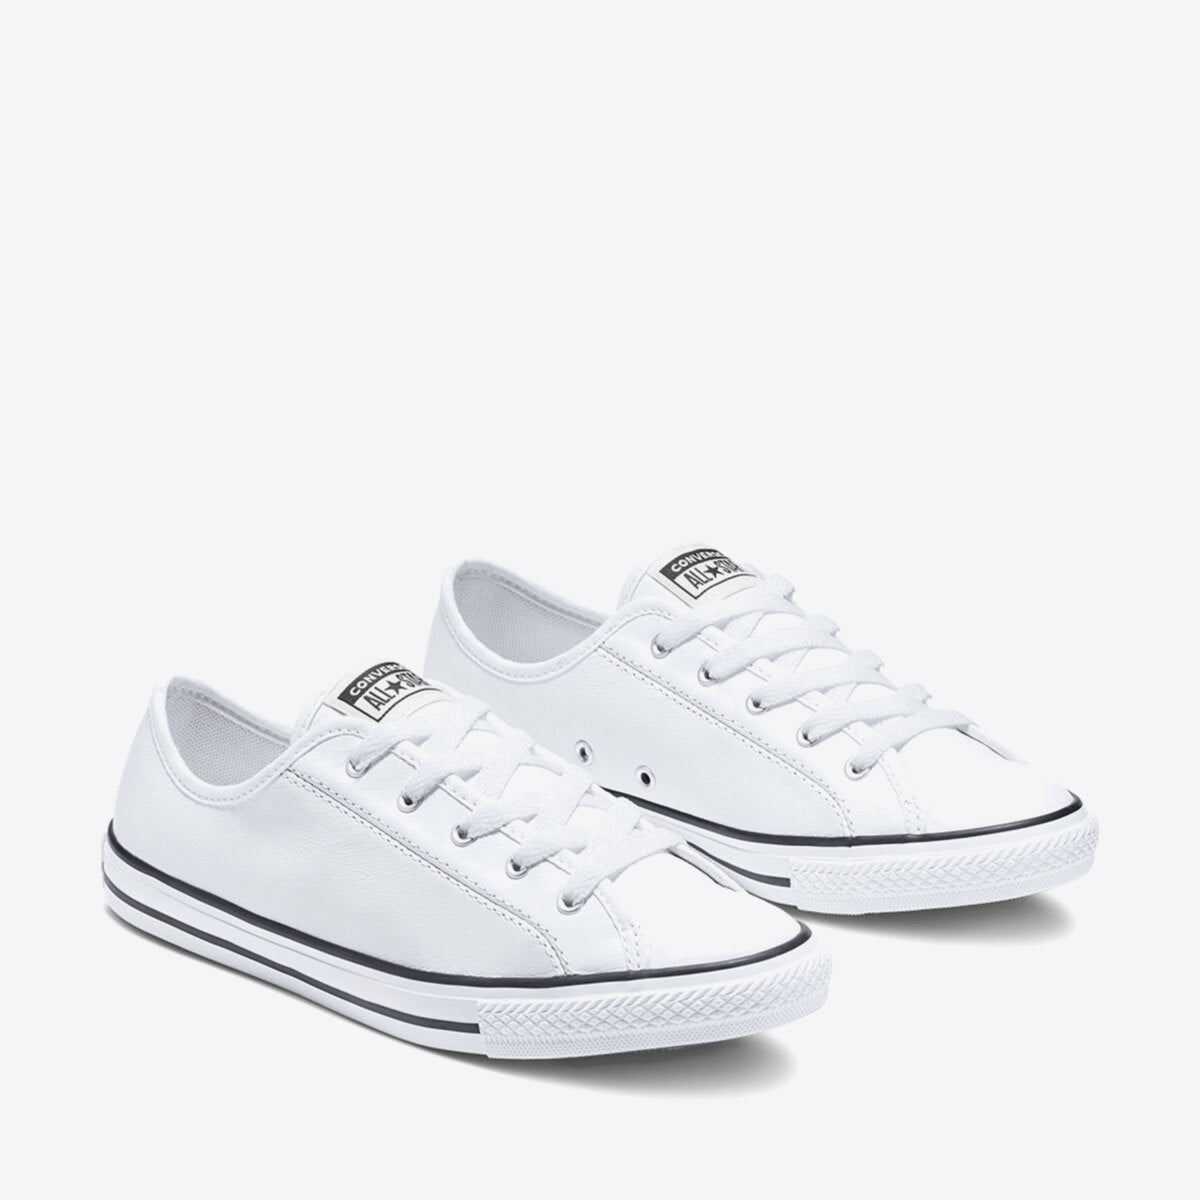 CONVERSE Dainty 2.0 Leather Low White - Image 3